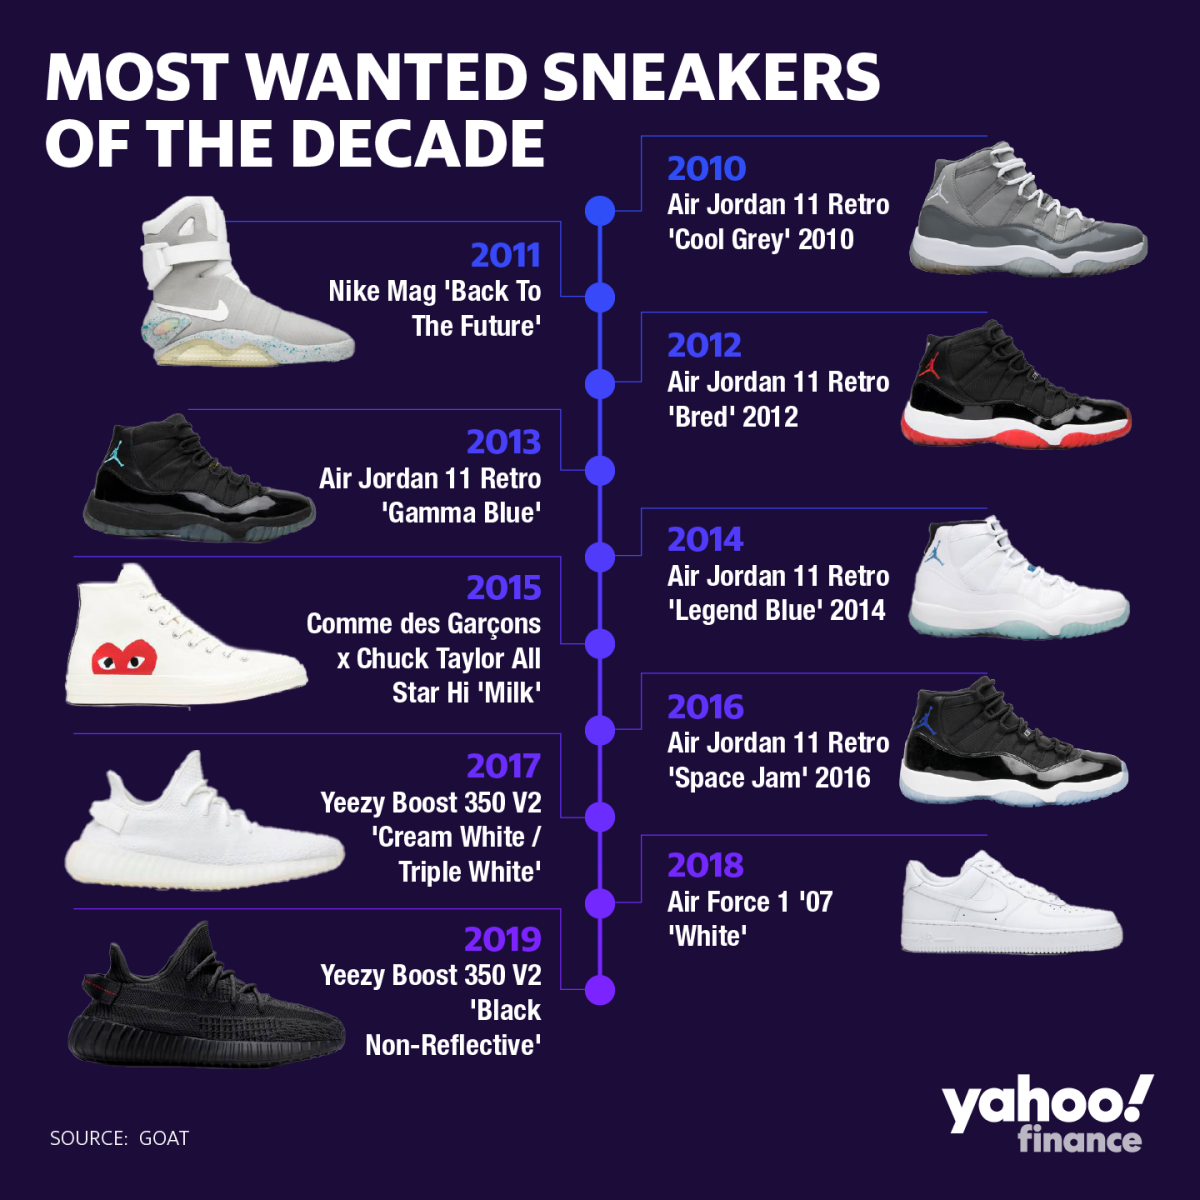 The most-wanted sneakers of the decade 